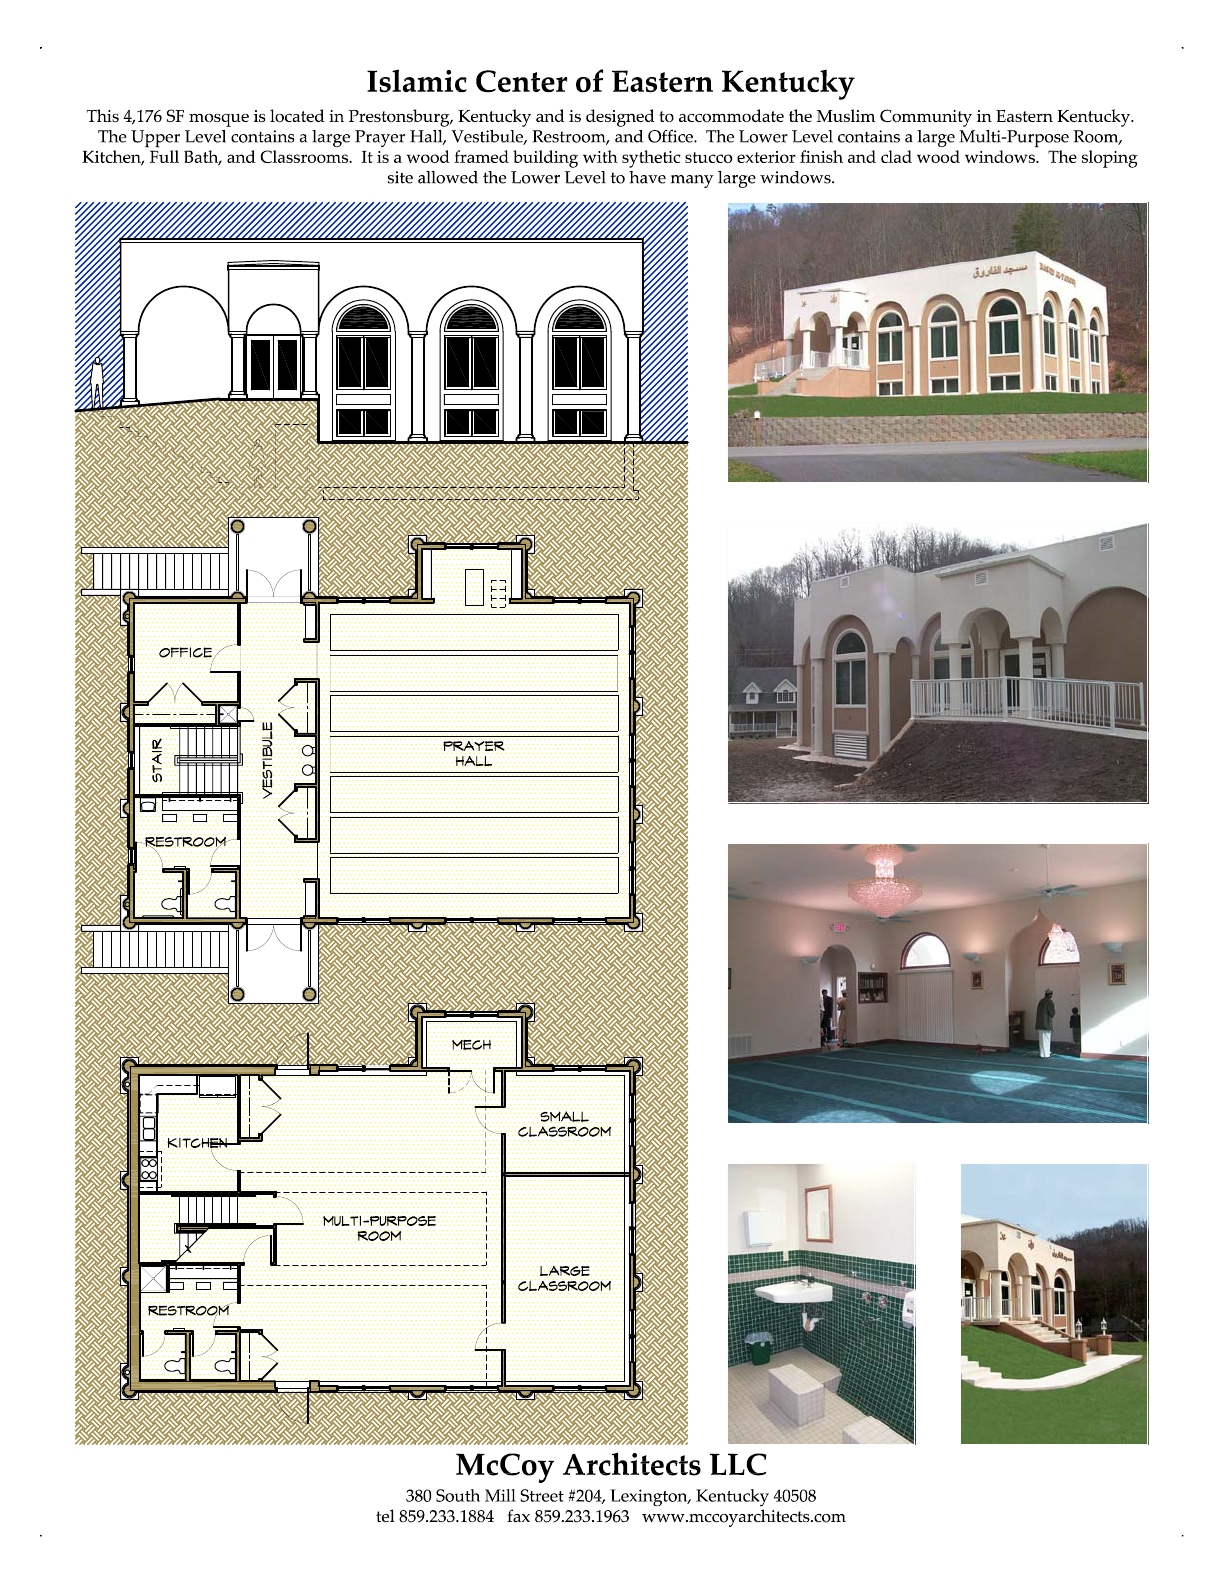 Islamic Center of Eastern Kentucky - Presentation board for the Islamic Center, with plans of the upper and lower levels and exterior and interior photos